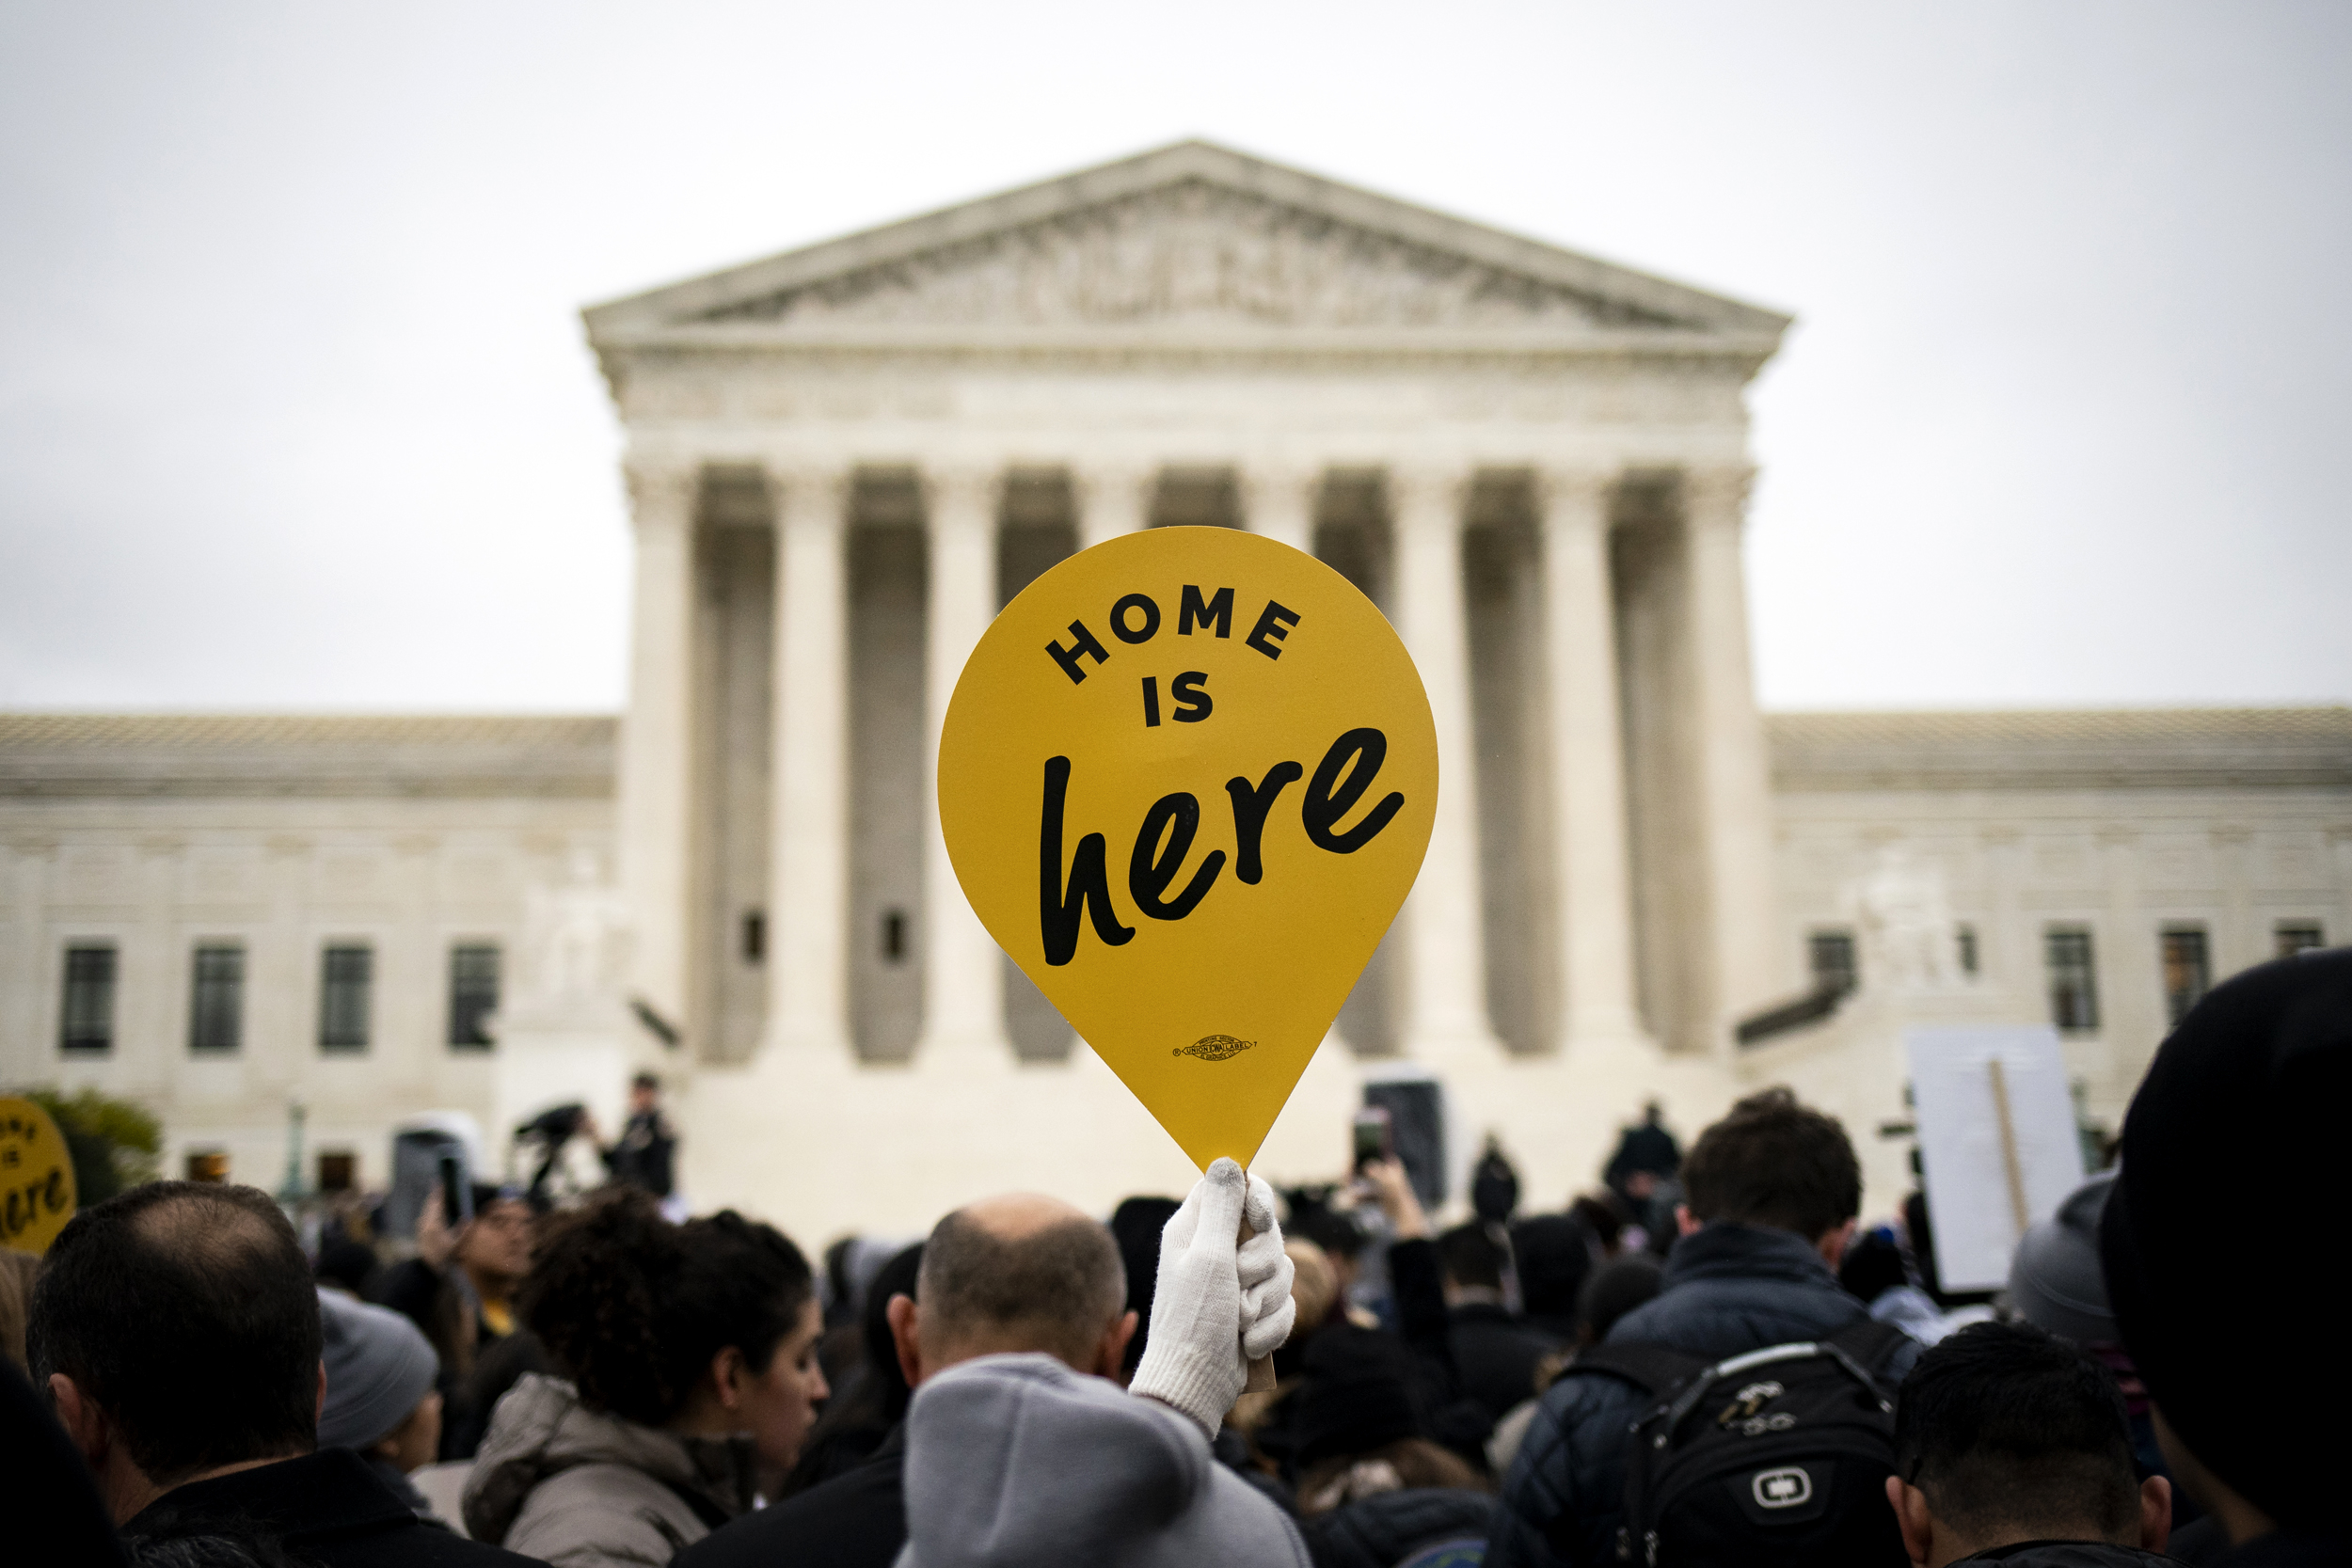 A demonstrator holds a "Home Is Here" sign during a rally supporting the Deferred Action for Childhood Arrivals program (DACA) outside of the Supreme Court in Washington, D.C., U.S., on Tuesday, Nov. 12, 2019. The Supreme Court hears arguments today over the Obama-era DACA program, which the Trump administration wants to undo. Photographer: Al Drago/Bloomberg via Getty Images